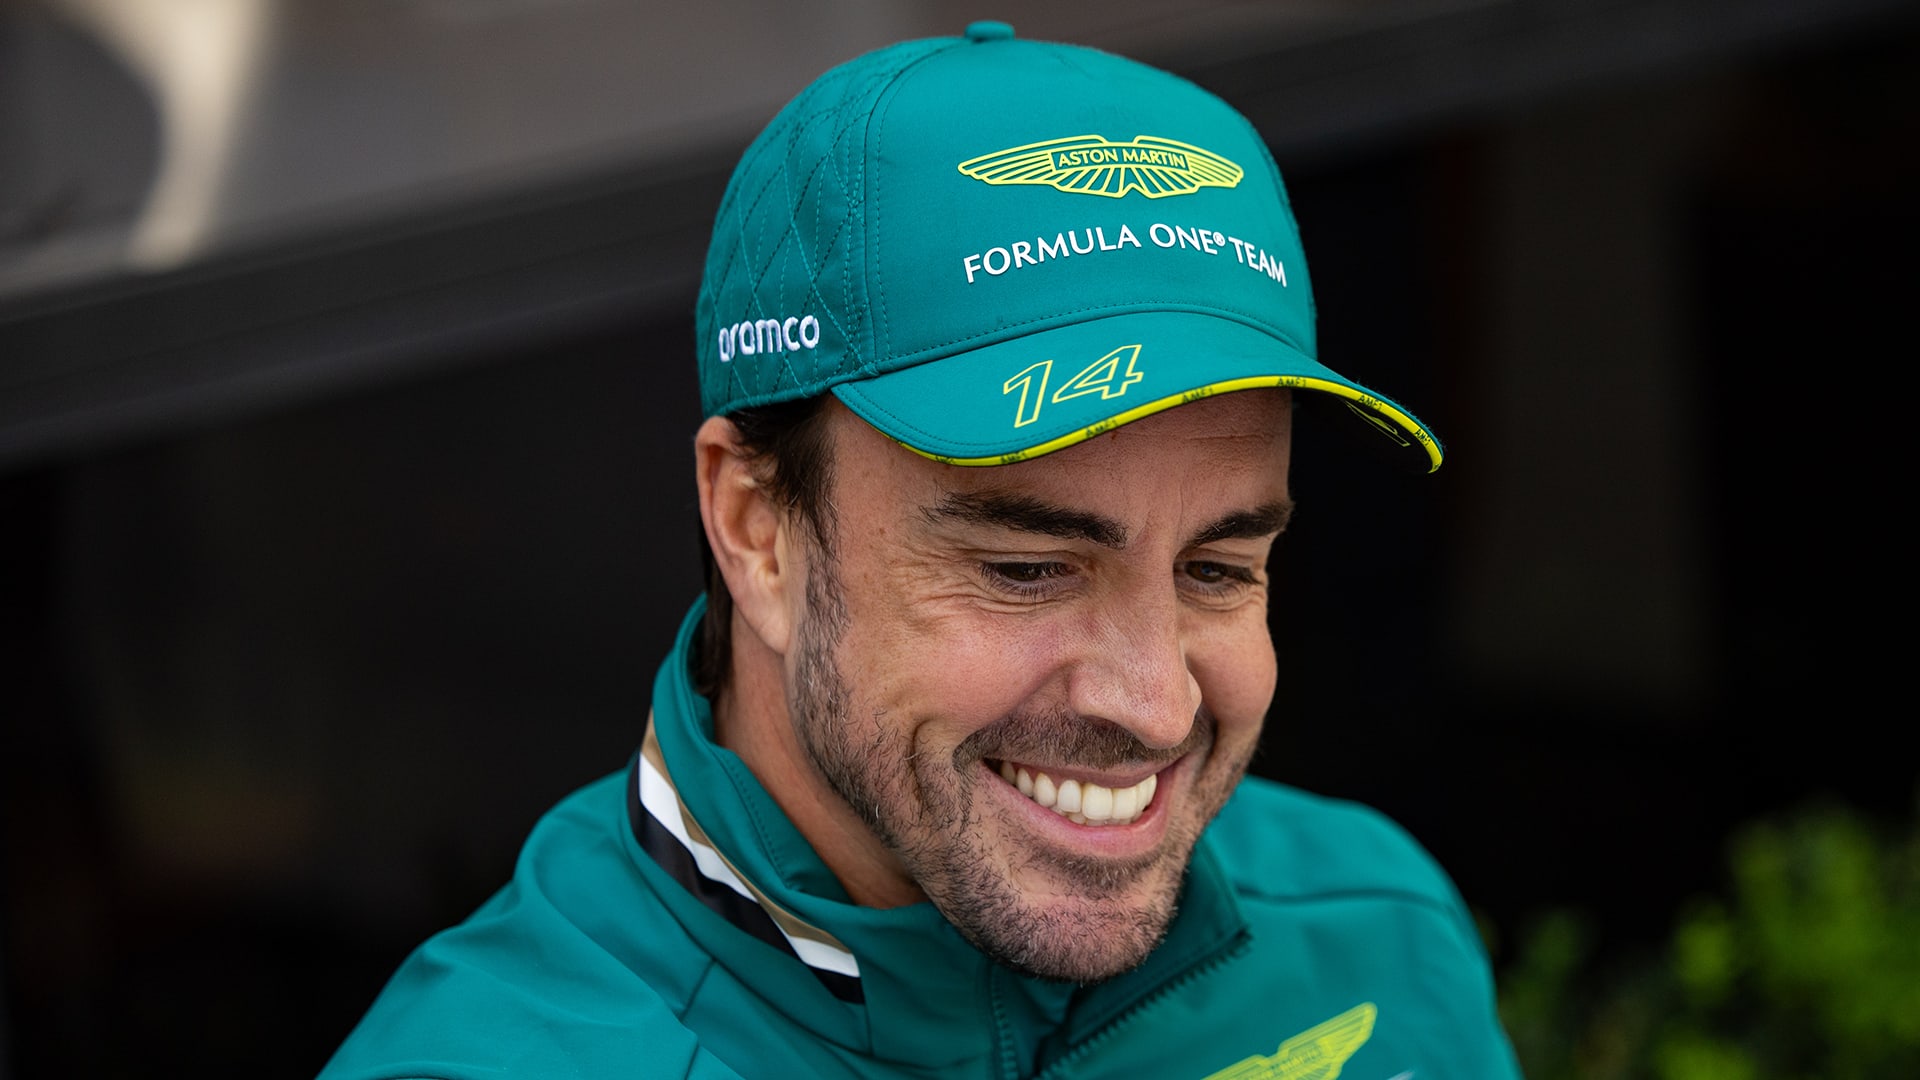 Alonso signs new deal with Aston Martin to end speculation over F1 future